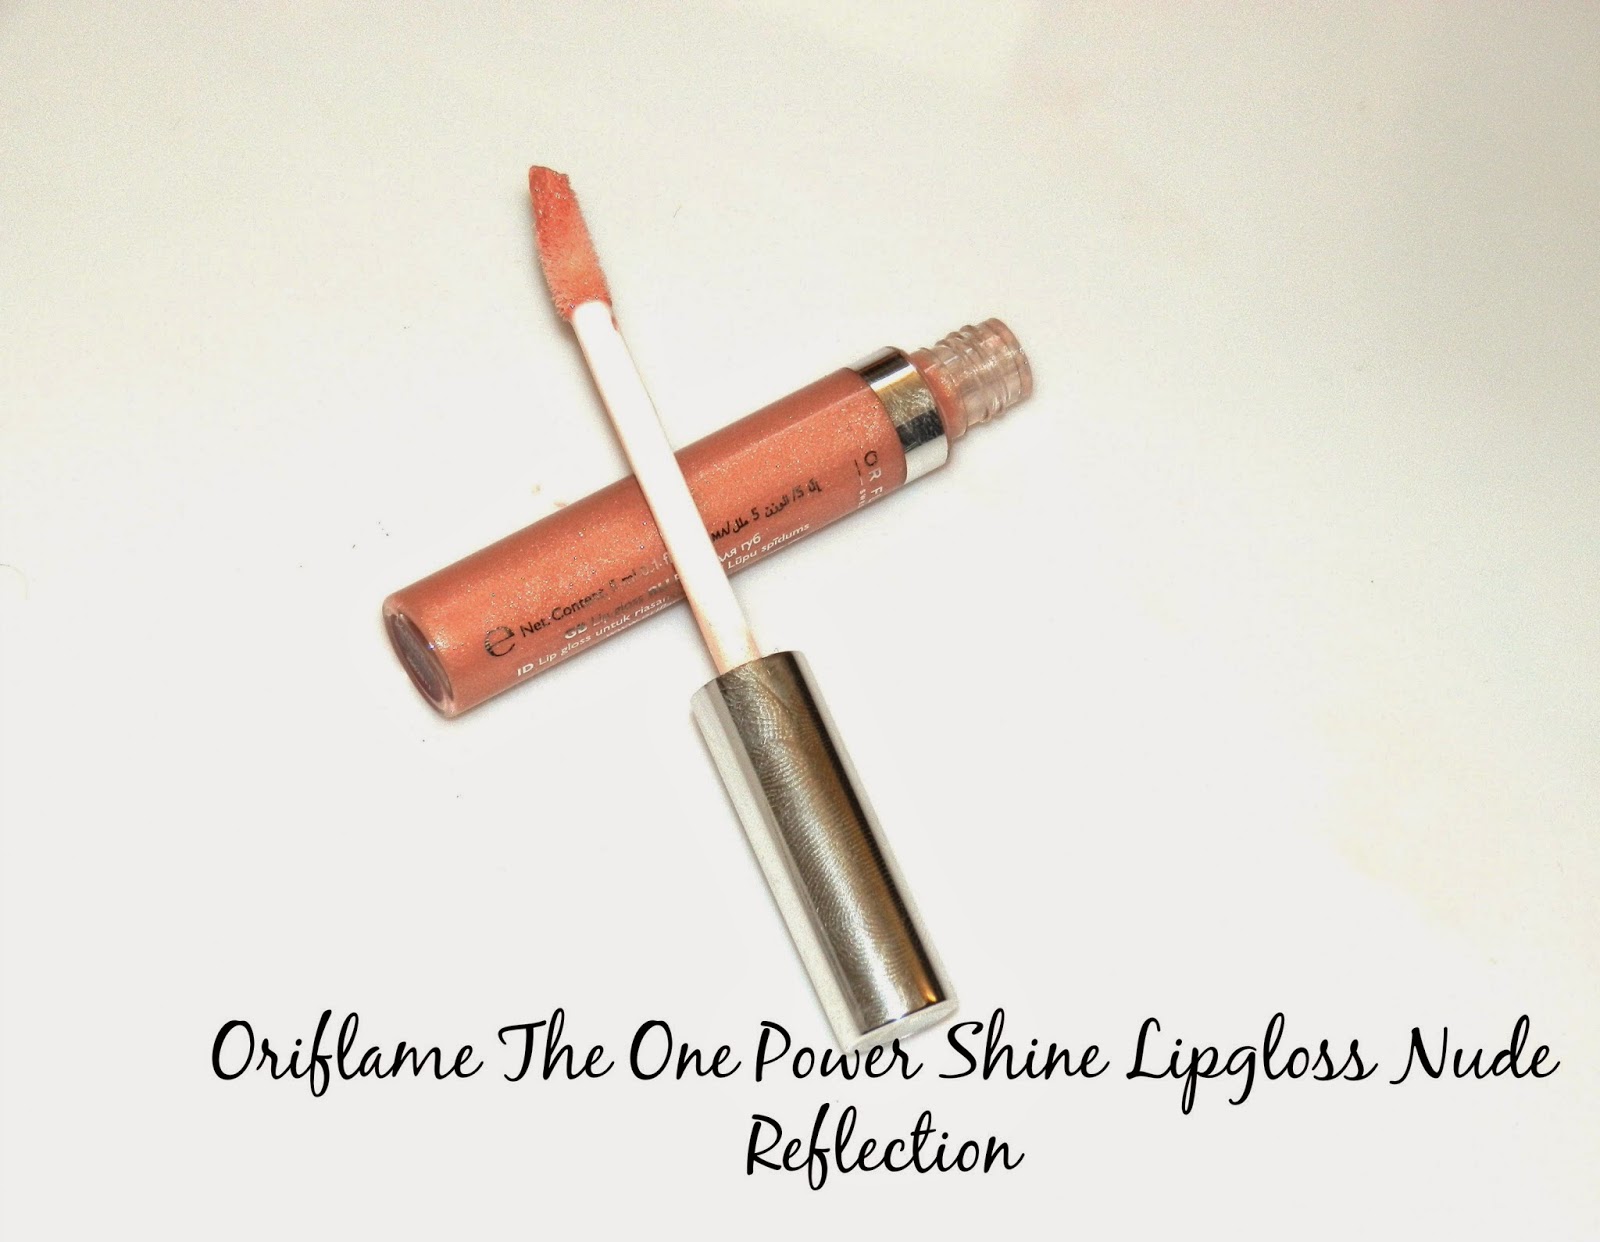 Oriflame The One Power Shine Lipgloss Nude Reflection Swatches 